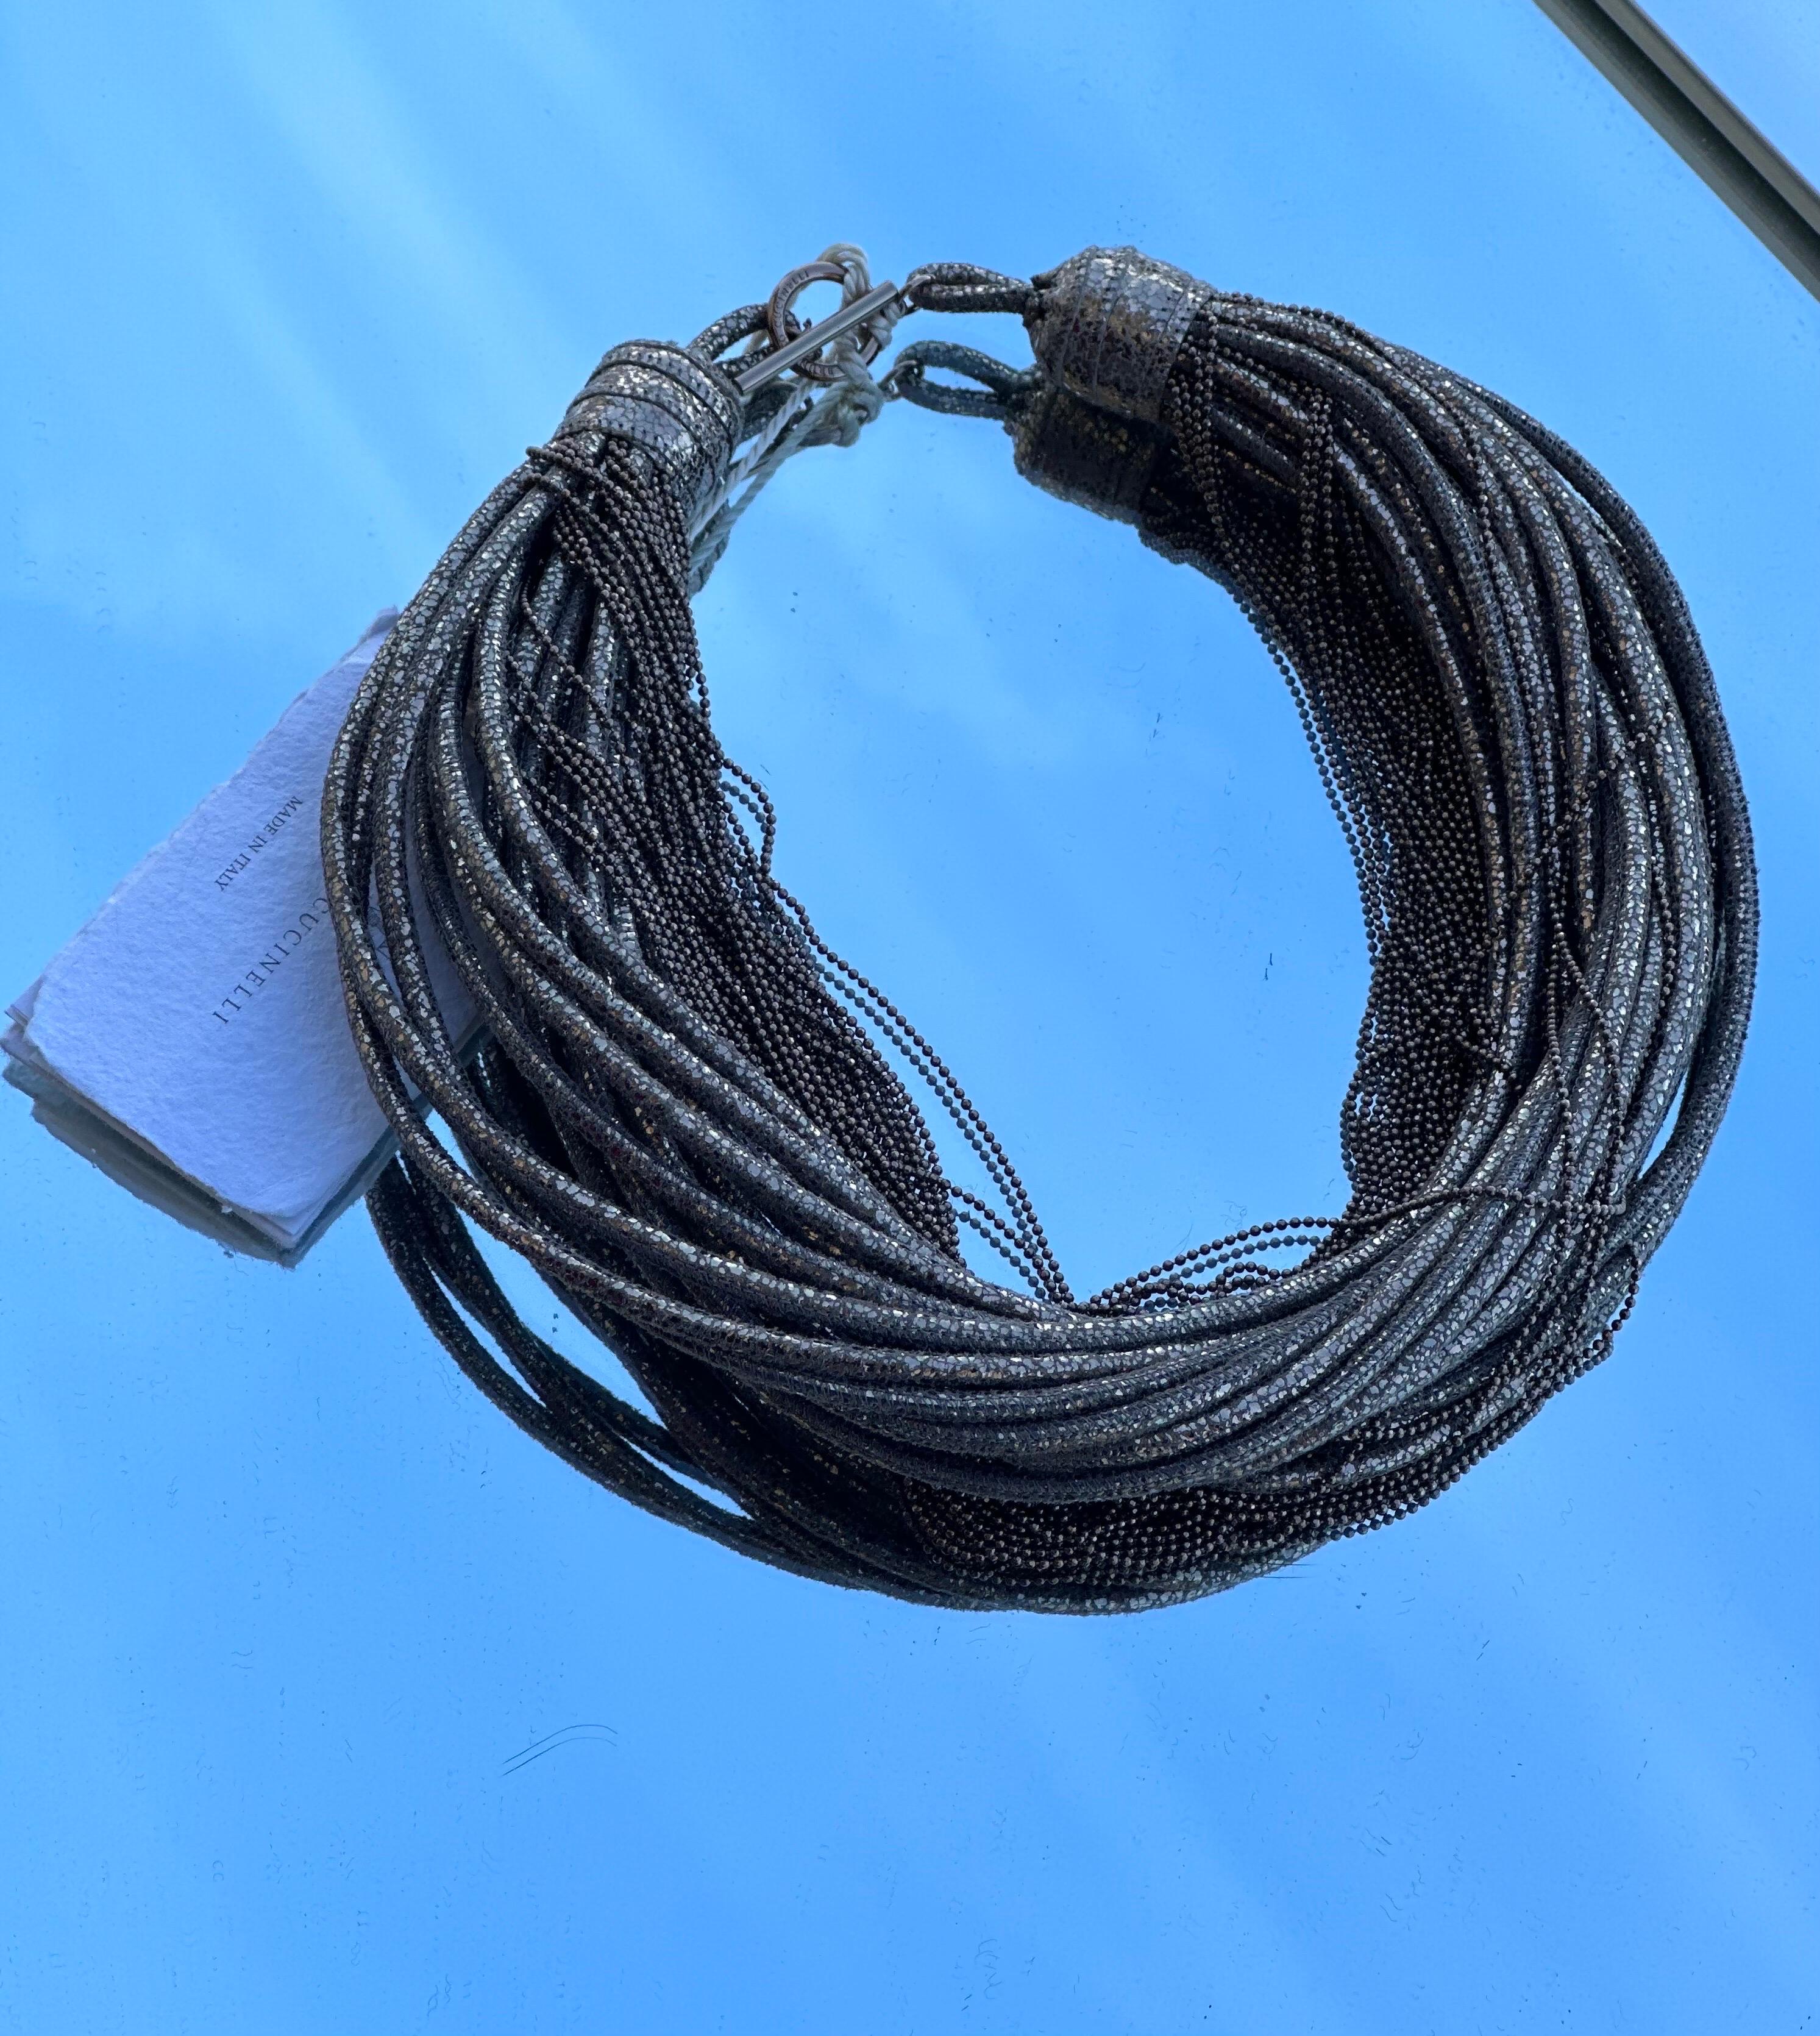 Brunello Cucinelli necklace in leather and free brass jewellery.
New with tag, comes in a cashmere dust bag.
Ideal jewel for any occasion, completely hypoallergenic and with silver closures. Its neutral but iridescent color makes the accessory